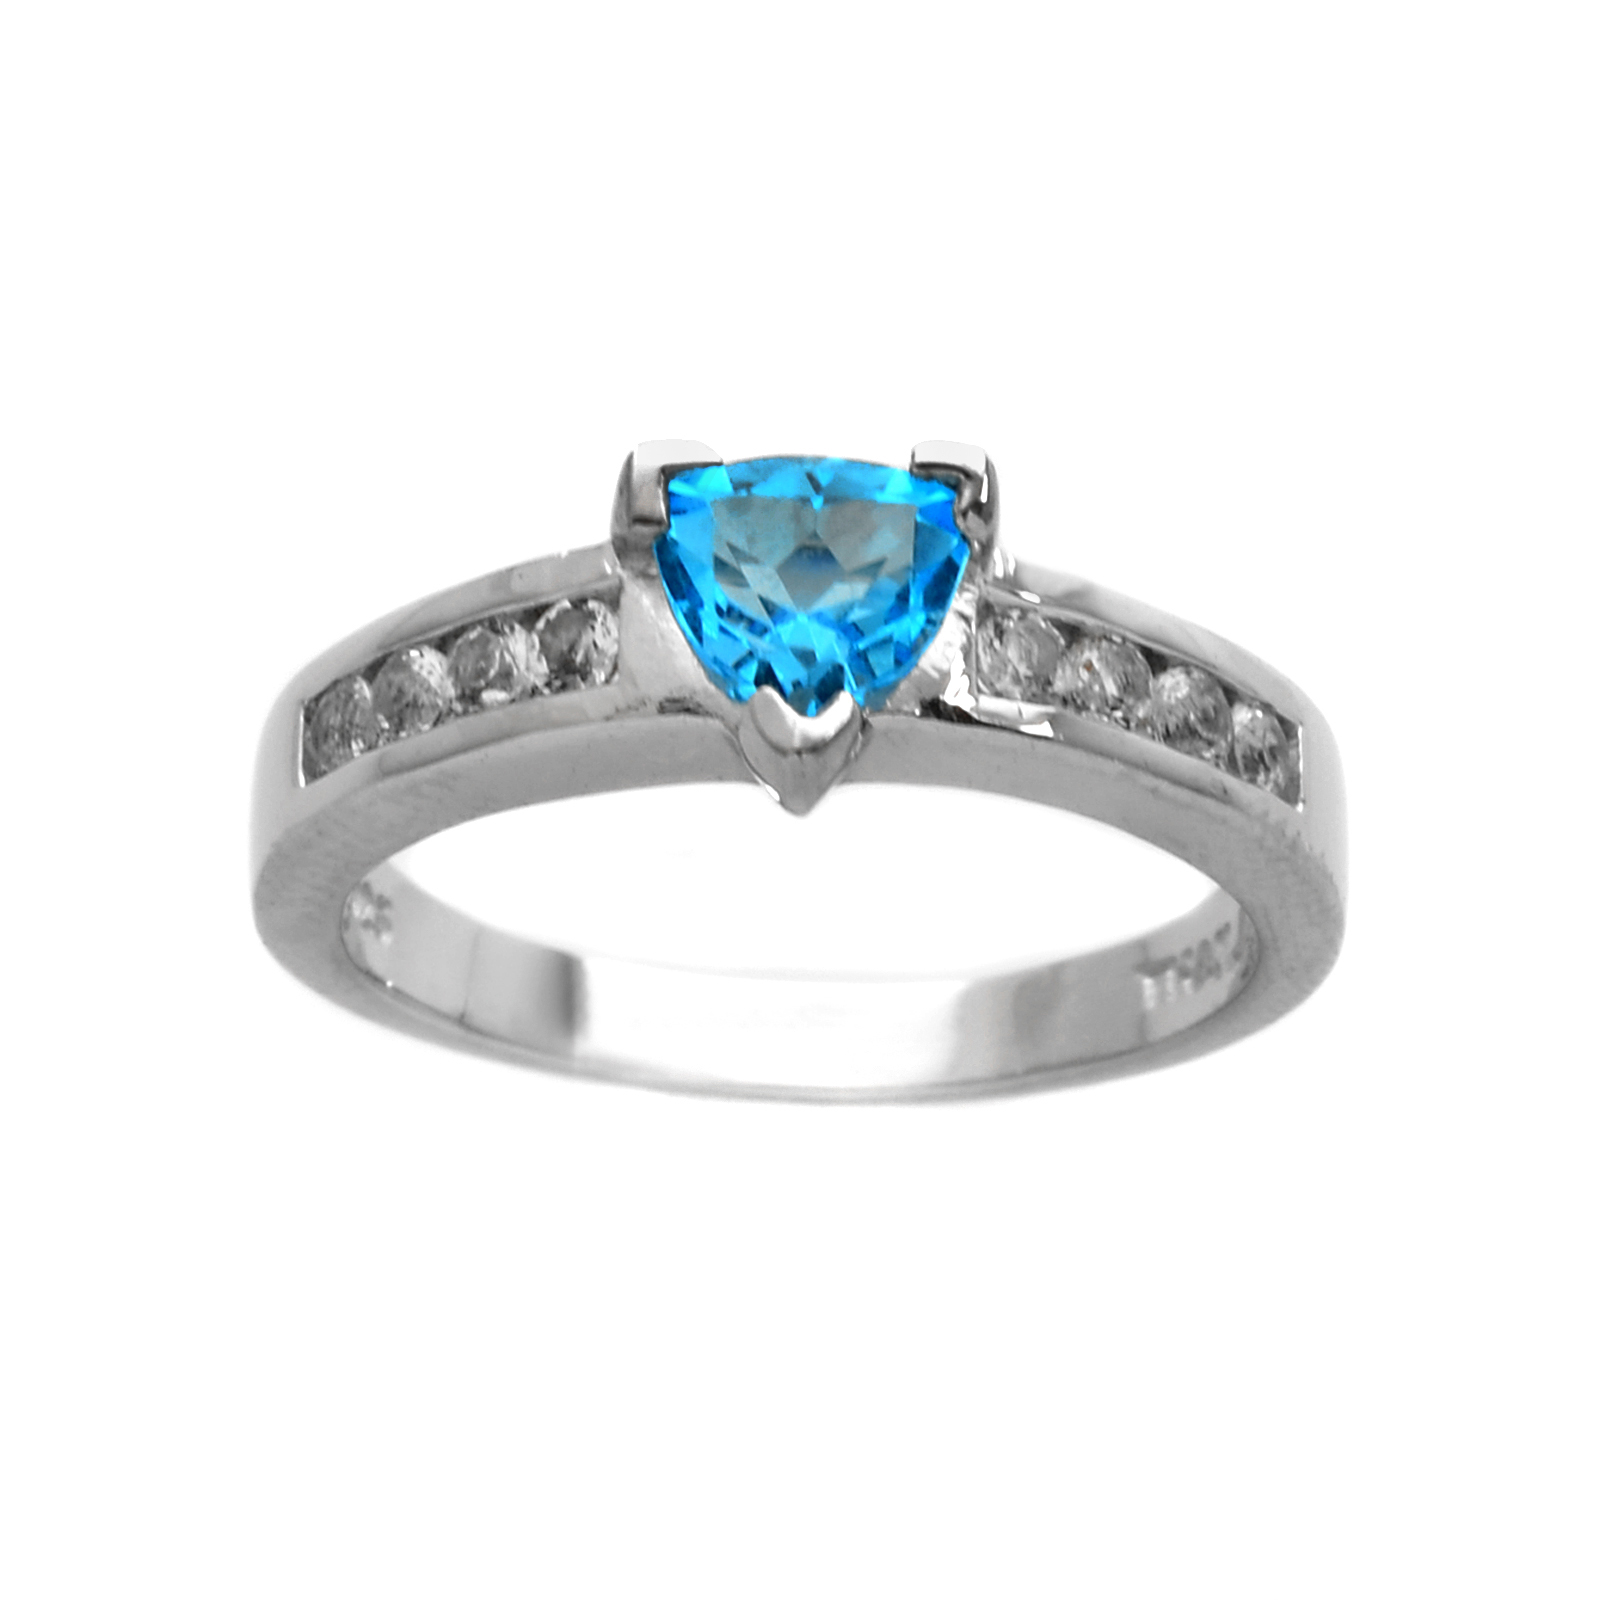 Sterling Silver Blue Topaz  & White Topaz  Ring - Size 7 Only